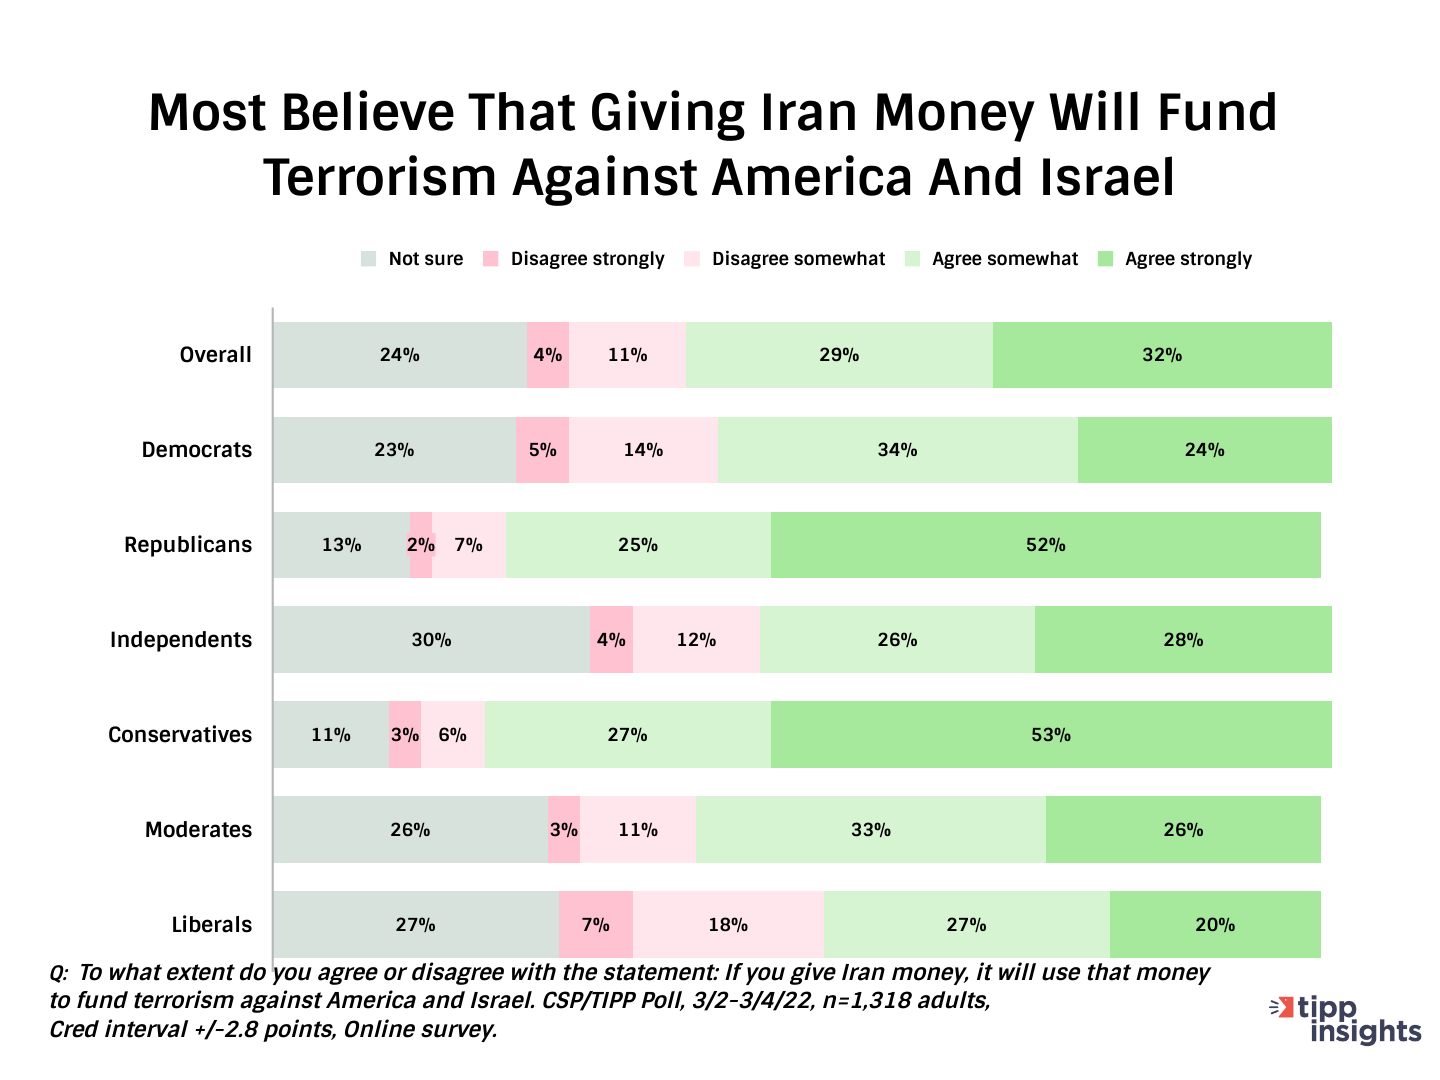 Most believe that giving Iran money will fund terrorism against America and Israel.